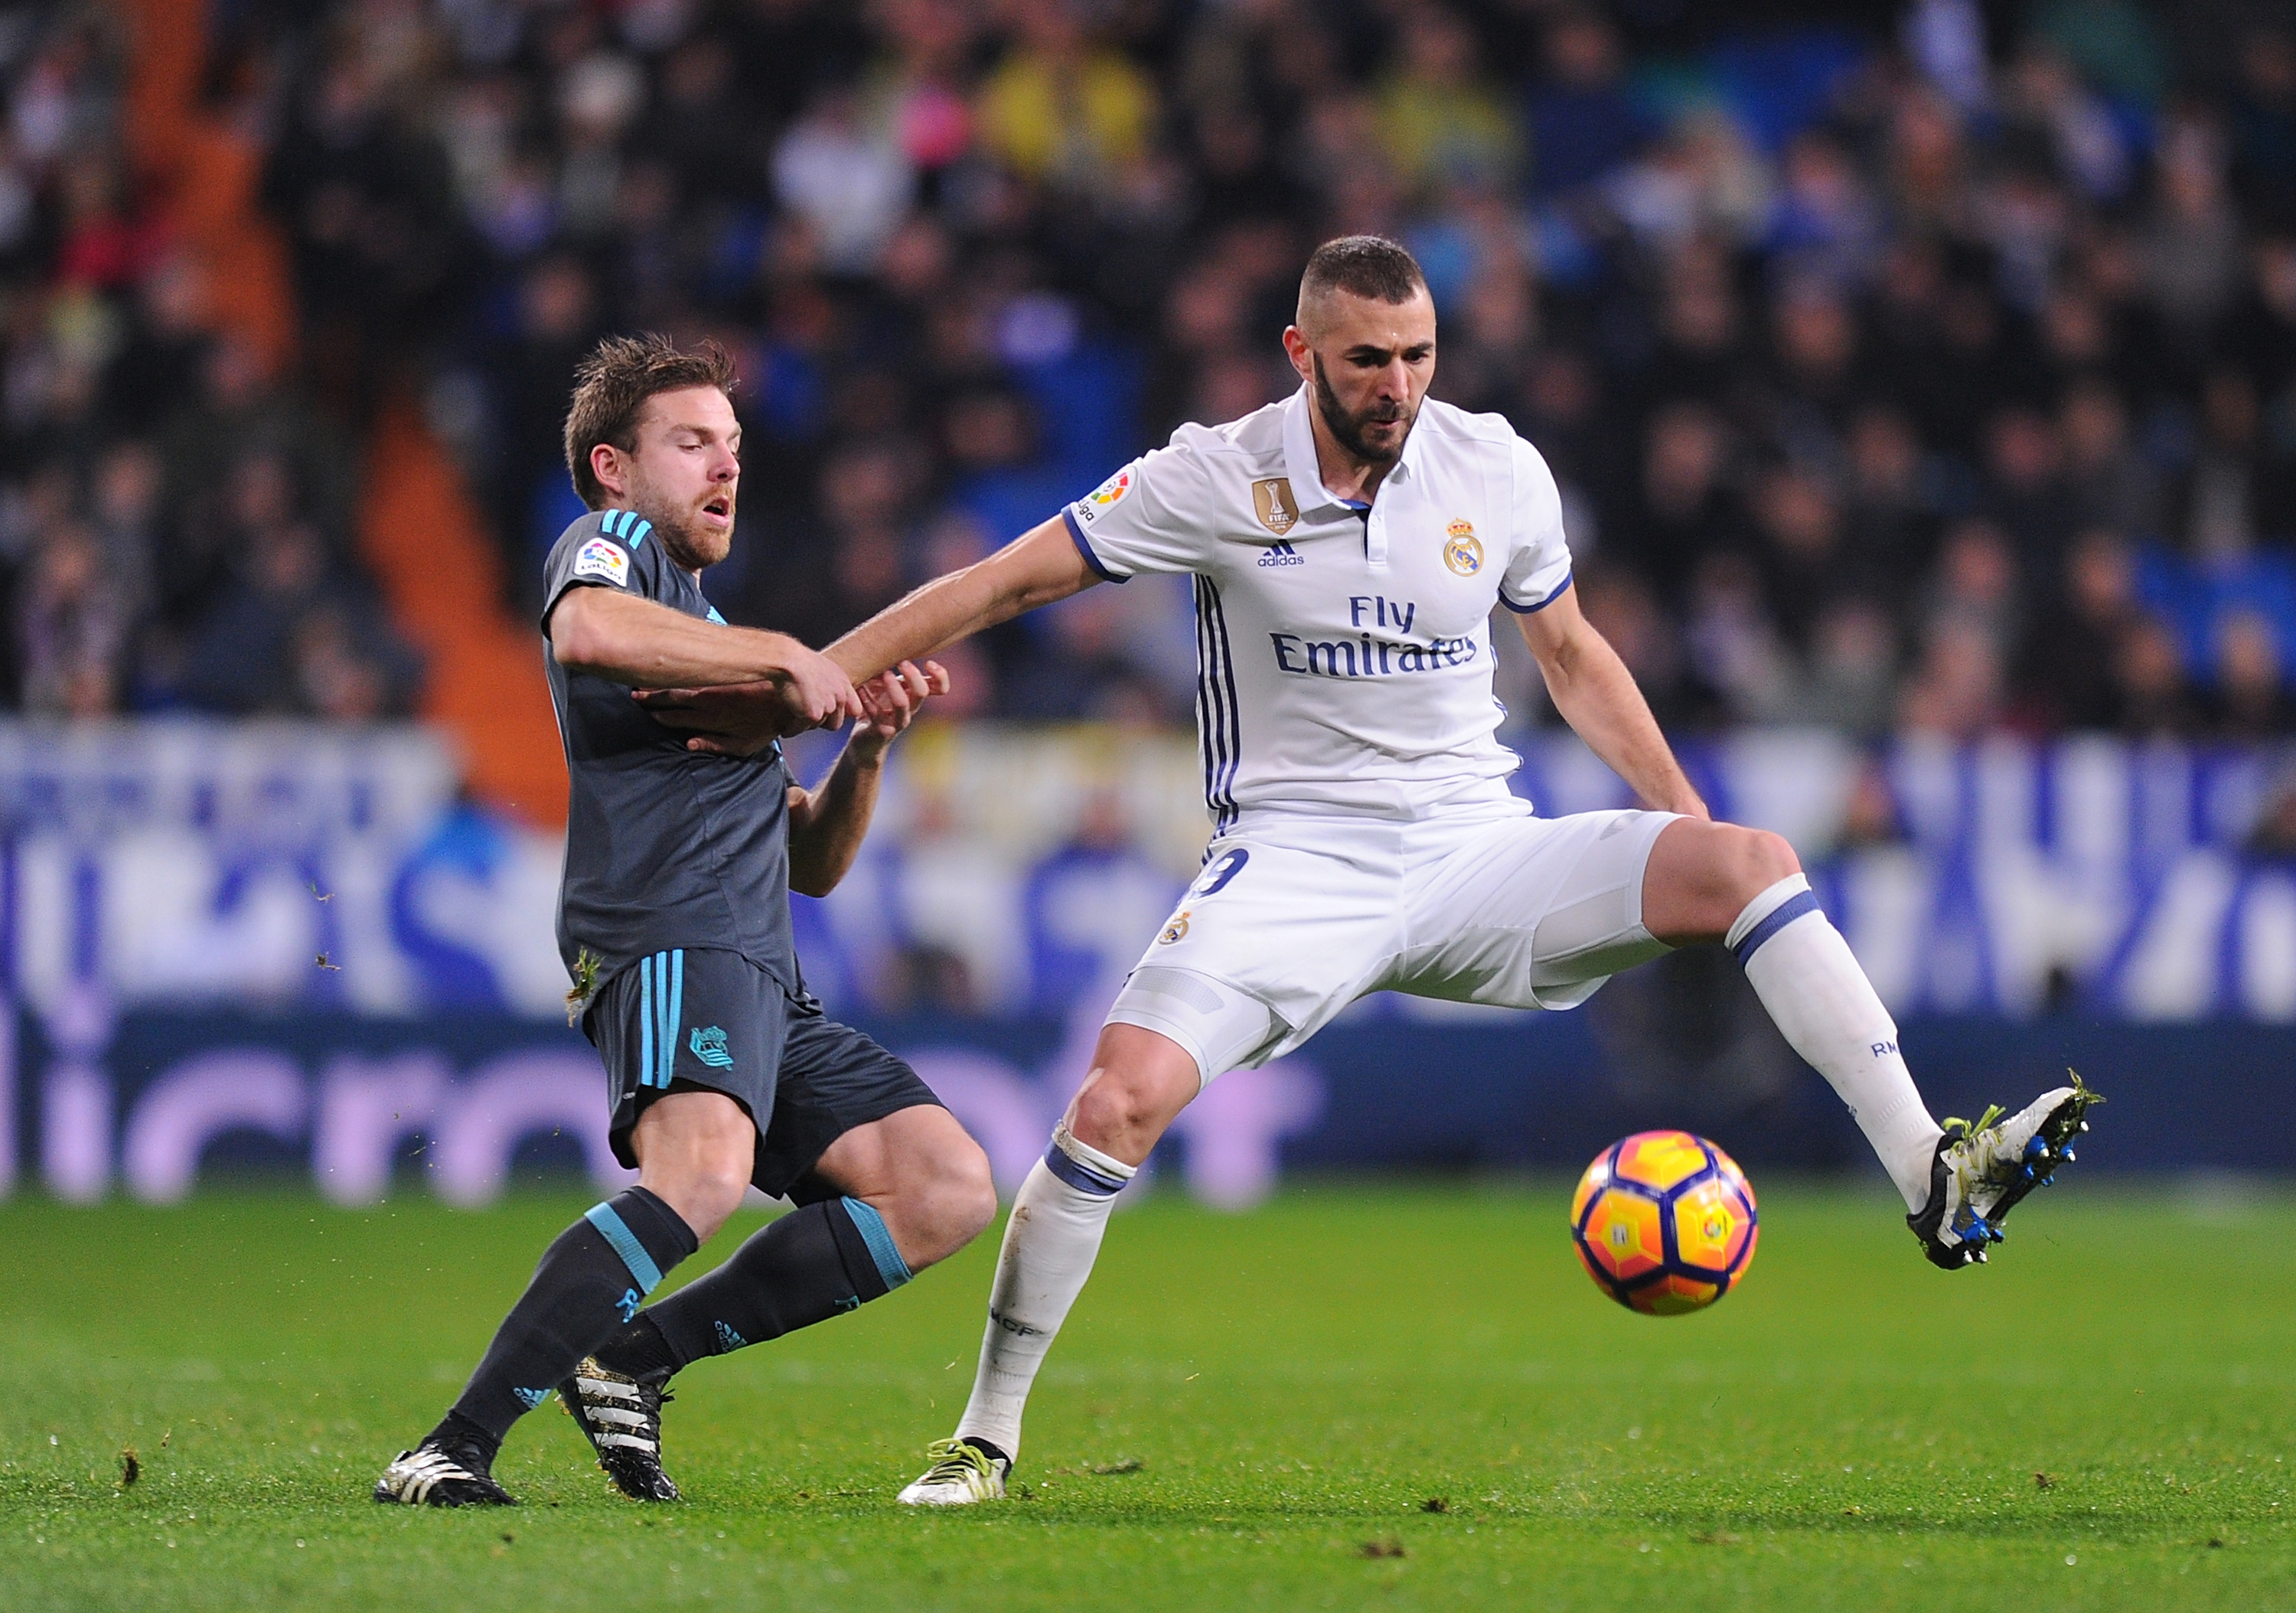 MADRID, SPAIN - JANUARY 29:  Karim Benzema of Real Madrid is tackled by Asier Illarramend of Real Sociedad de Futbol during the La Liga match between Real Madrid CF and Real Sociedad de Futbol at the Bernabeu on January 29, 2017 in Madrid, Spain.  (Photo by Denis Doyle/Getty Images)